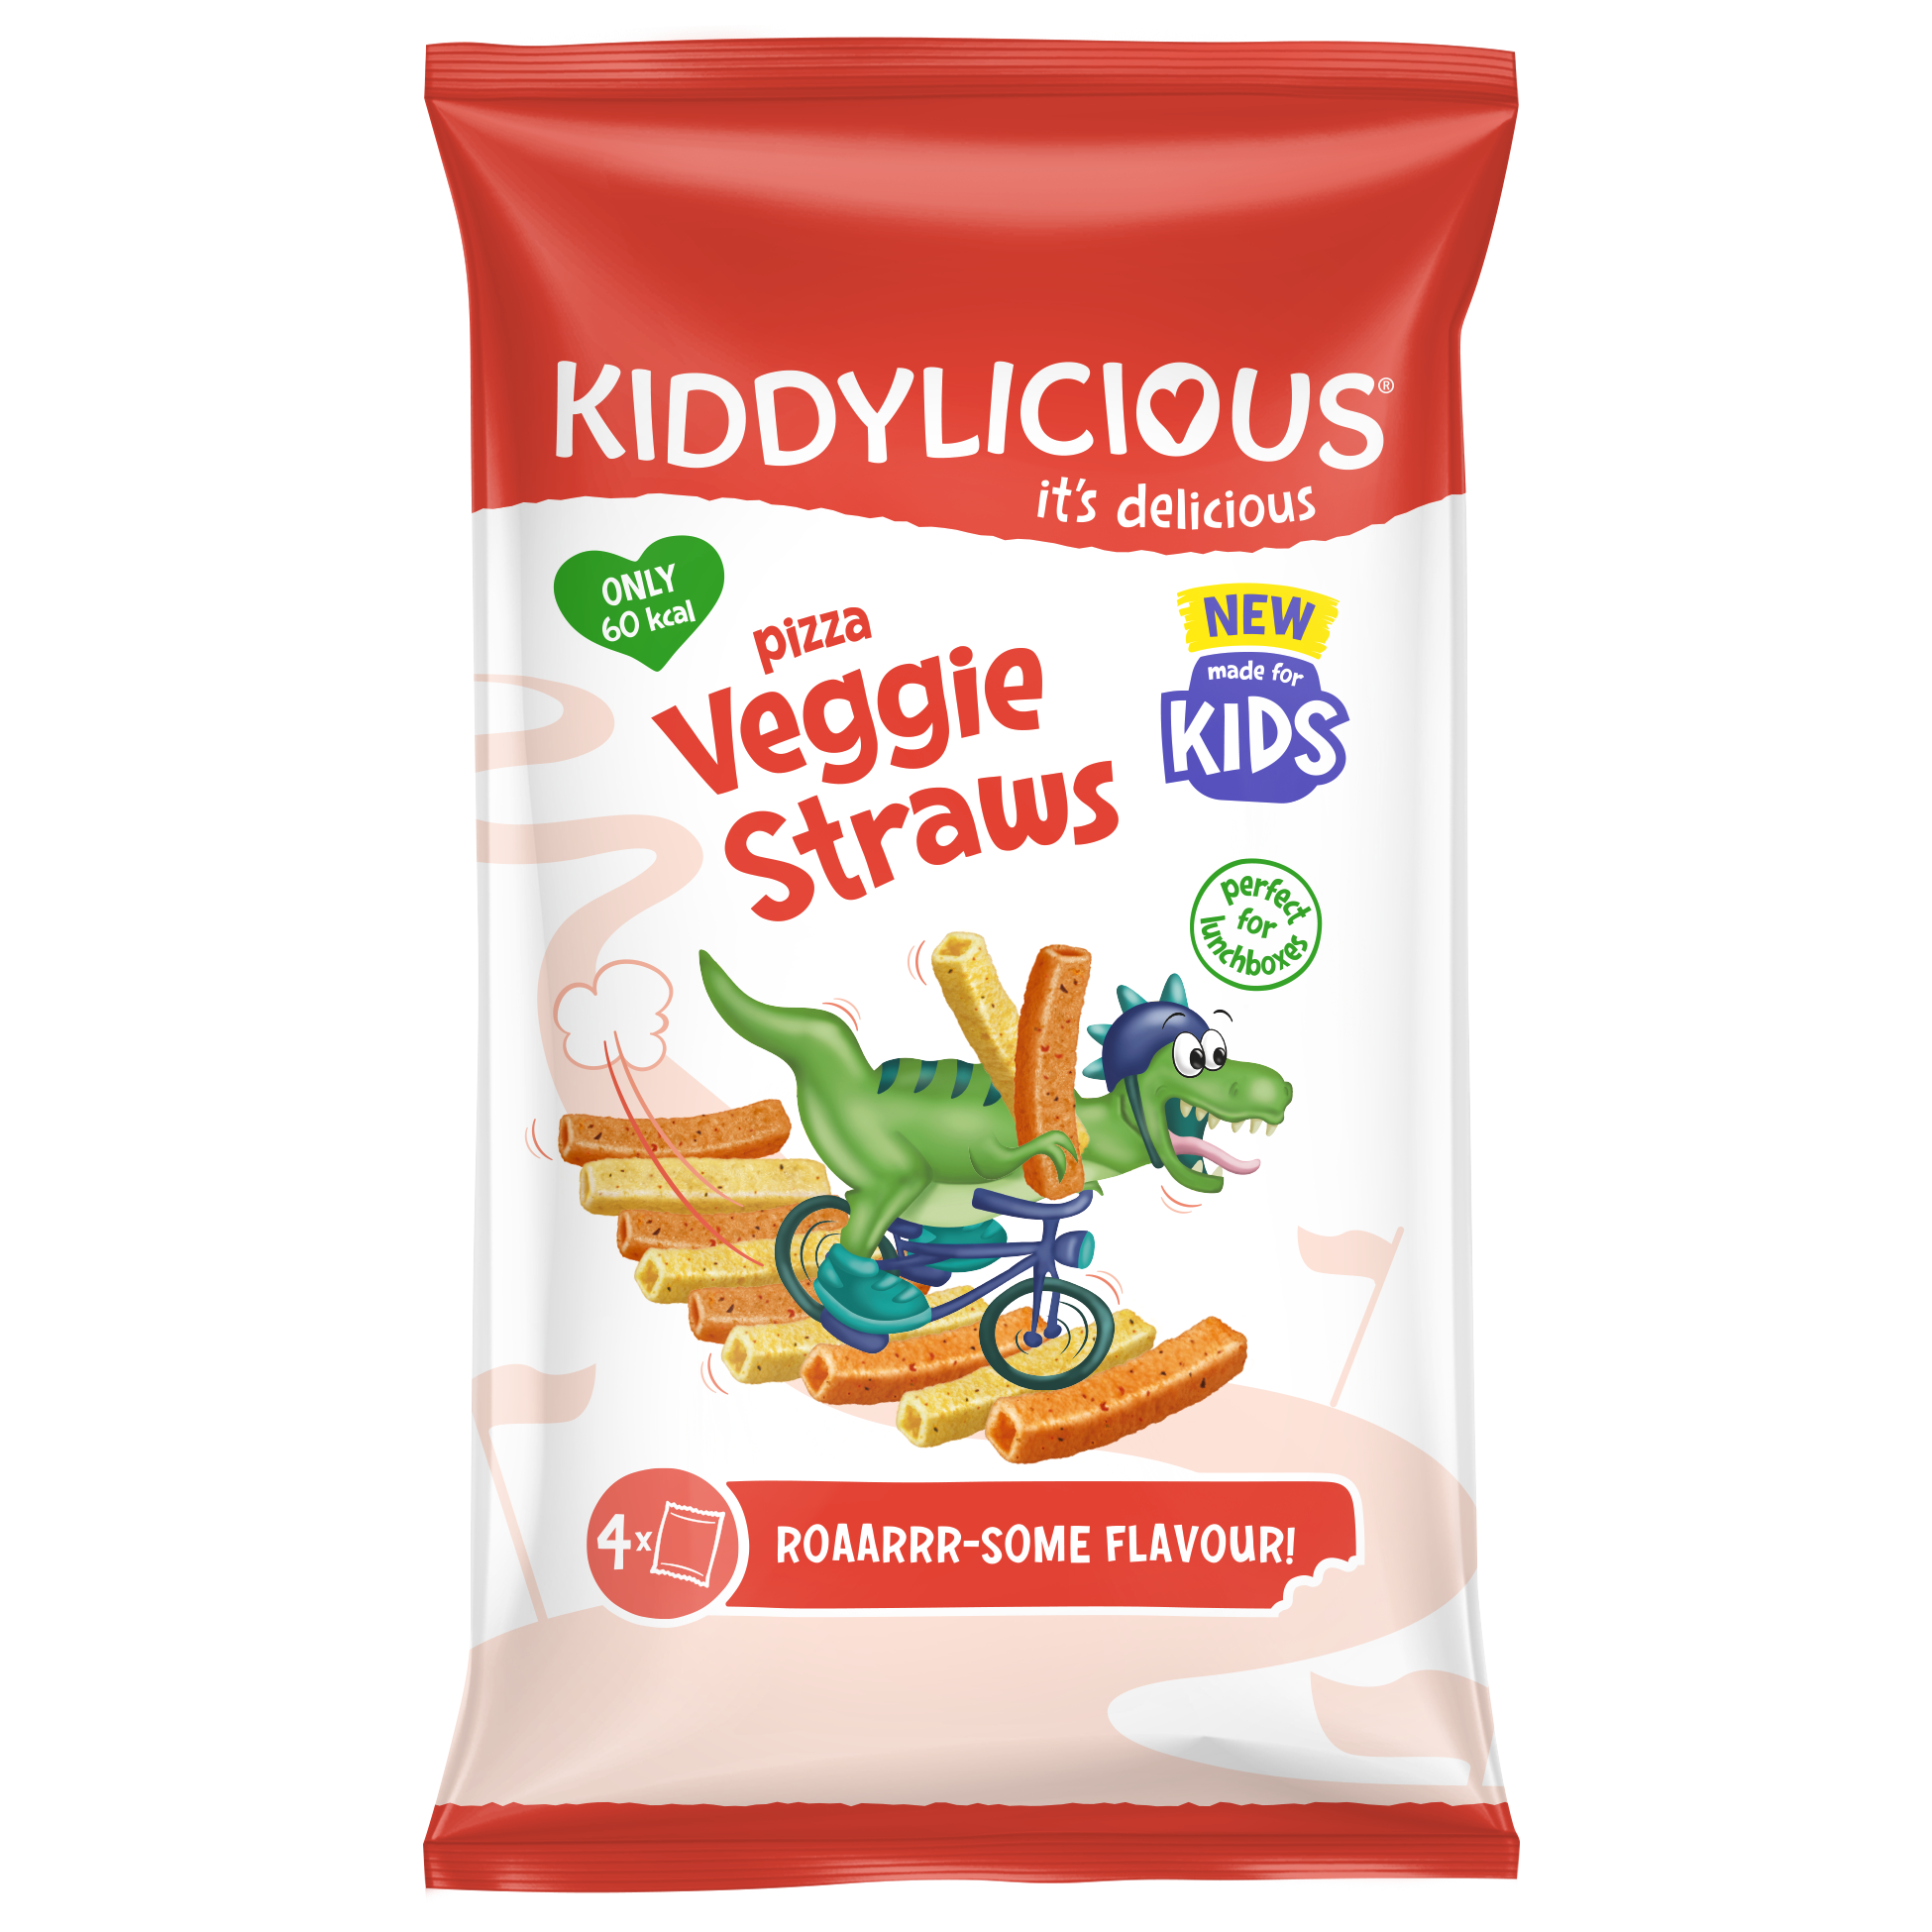 Kiddylicious Veggie Straws Pizza flavour snack multipack with dinosaur on pack